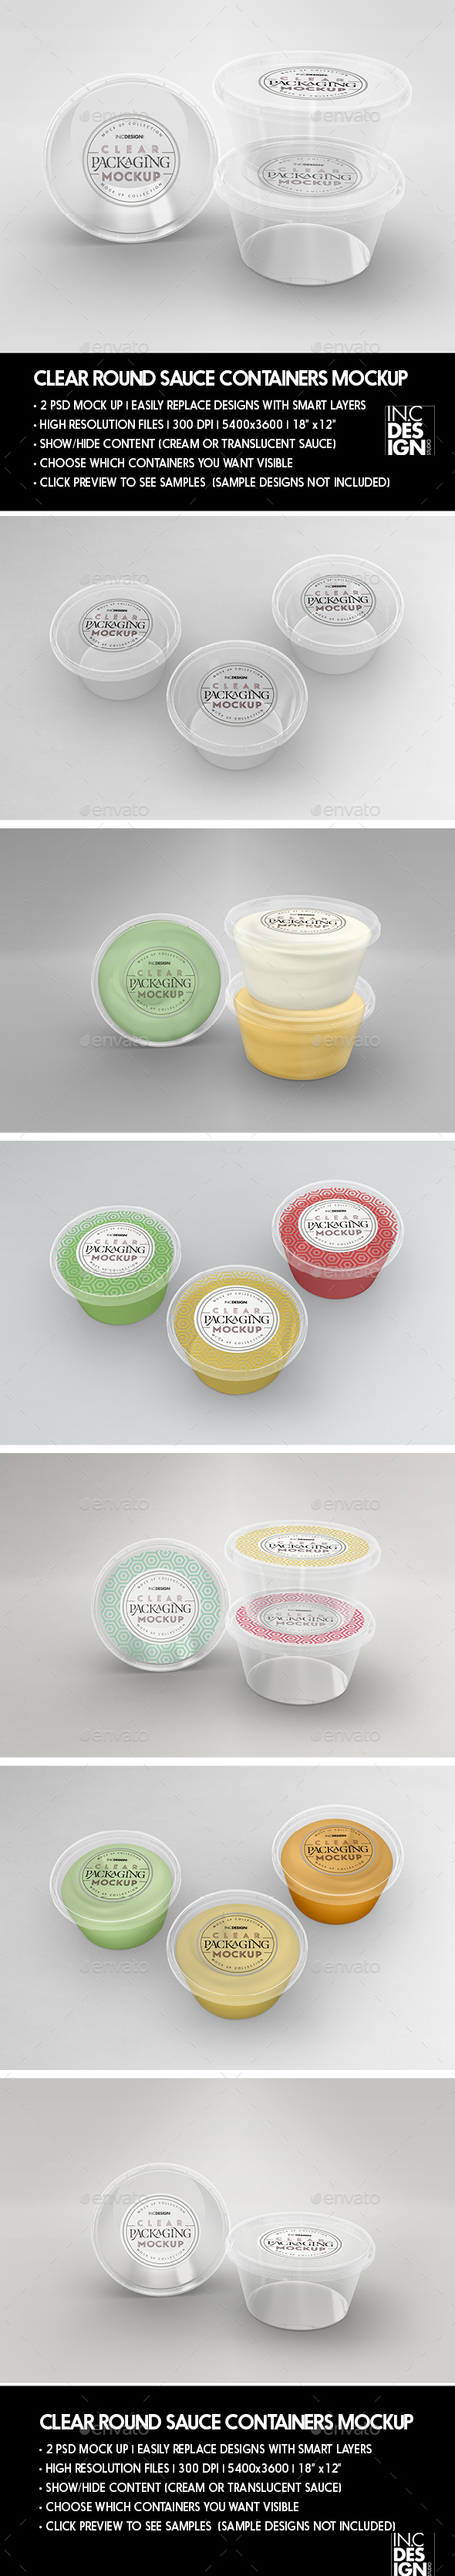 Download Clear Round Sauce Containers Packaging Mockup By Incybautista Graphicriver